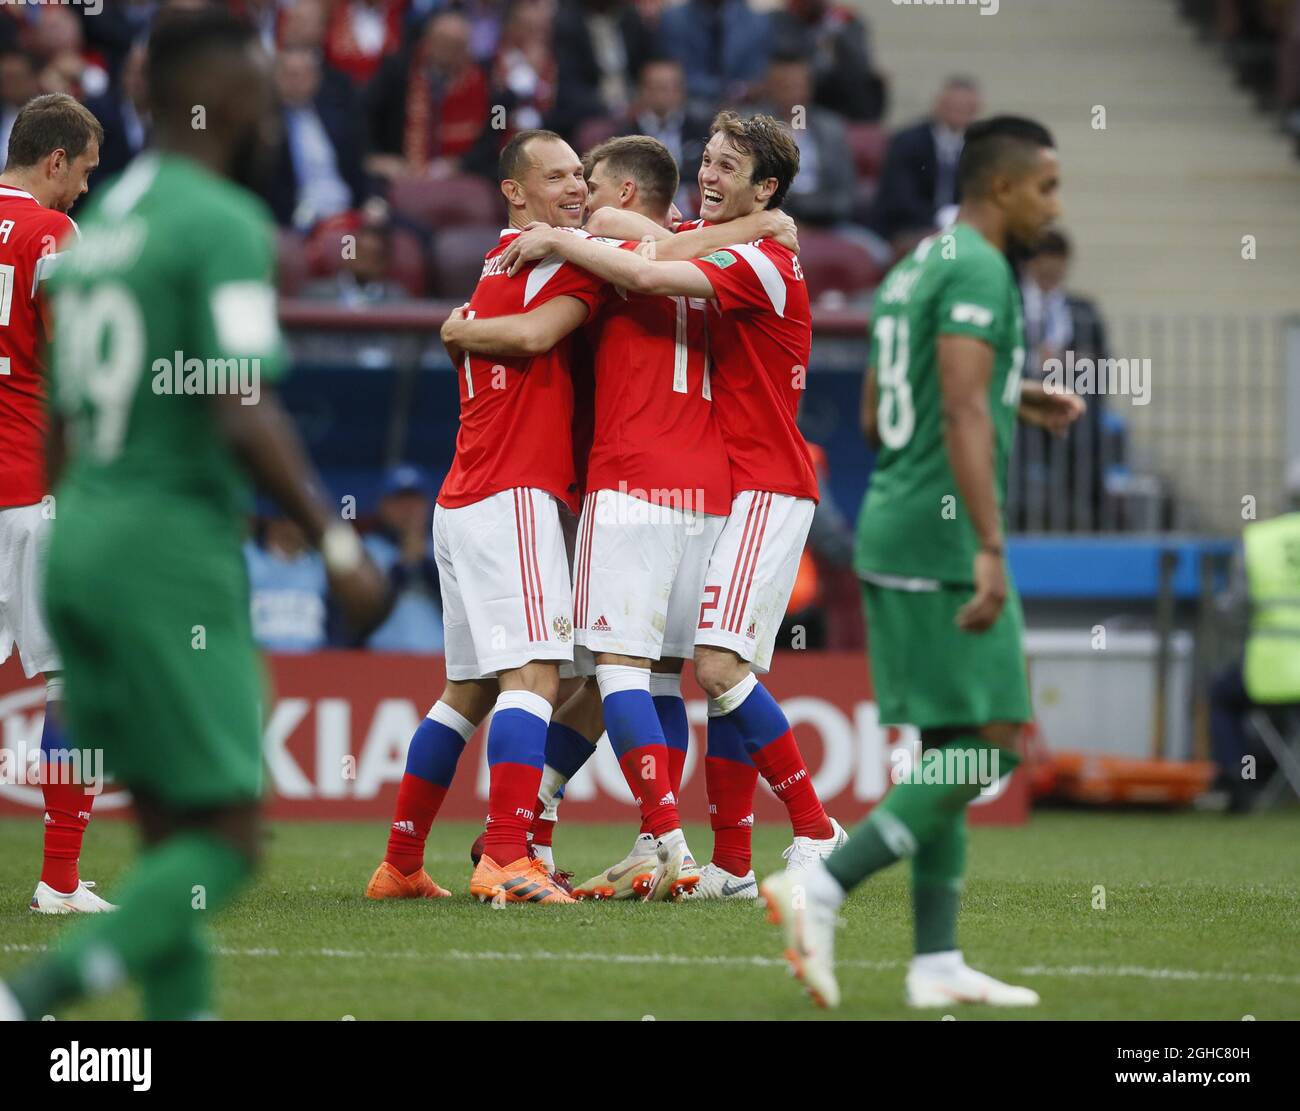 Aleksandr Samedov of Russia (c) celebrates scoring the 5th goal during the FIFA World Cup 2018 Group A match at the Luzhniki Stadium, Moscow. Picture date 14th June 2018. Picture credit should read: David Klein/Sportimage via PA Images Stock Photo